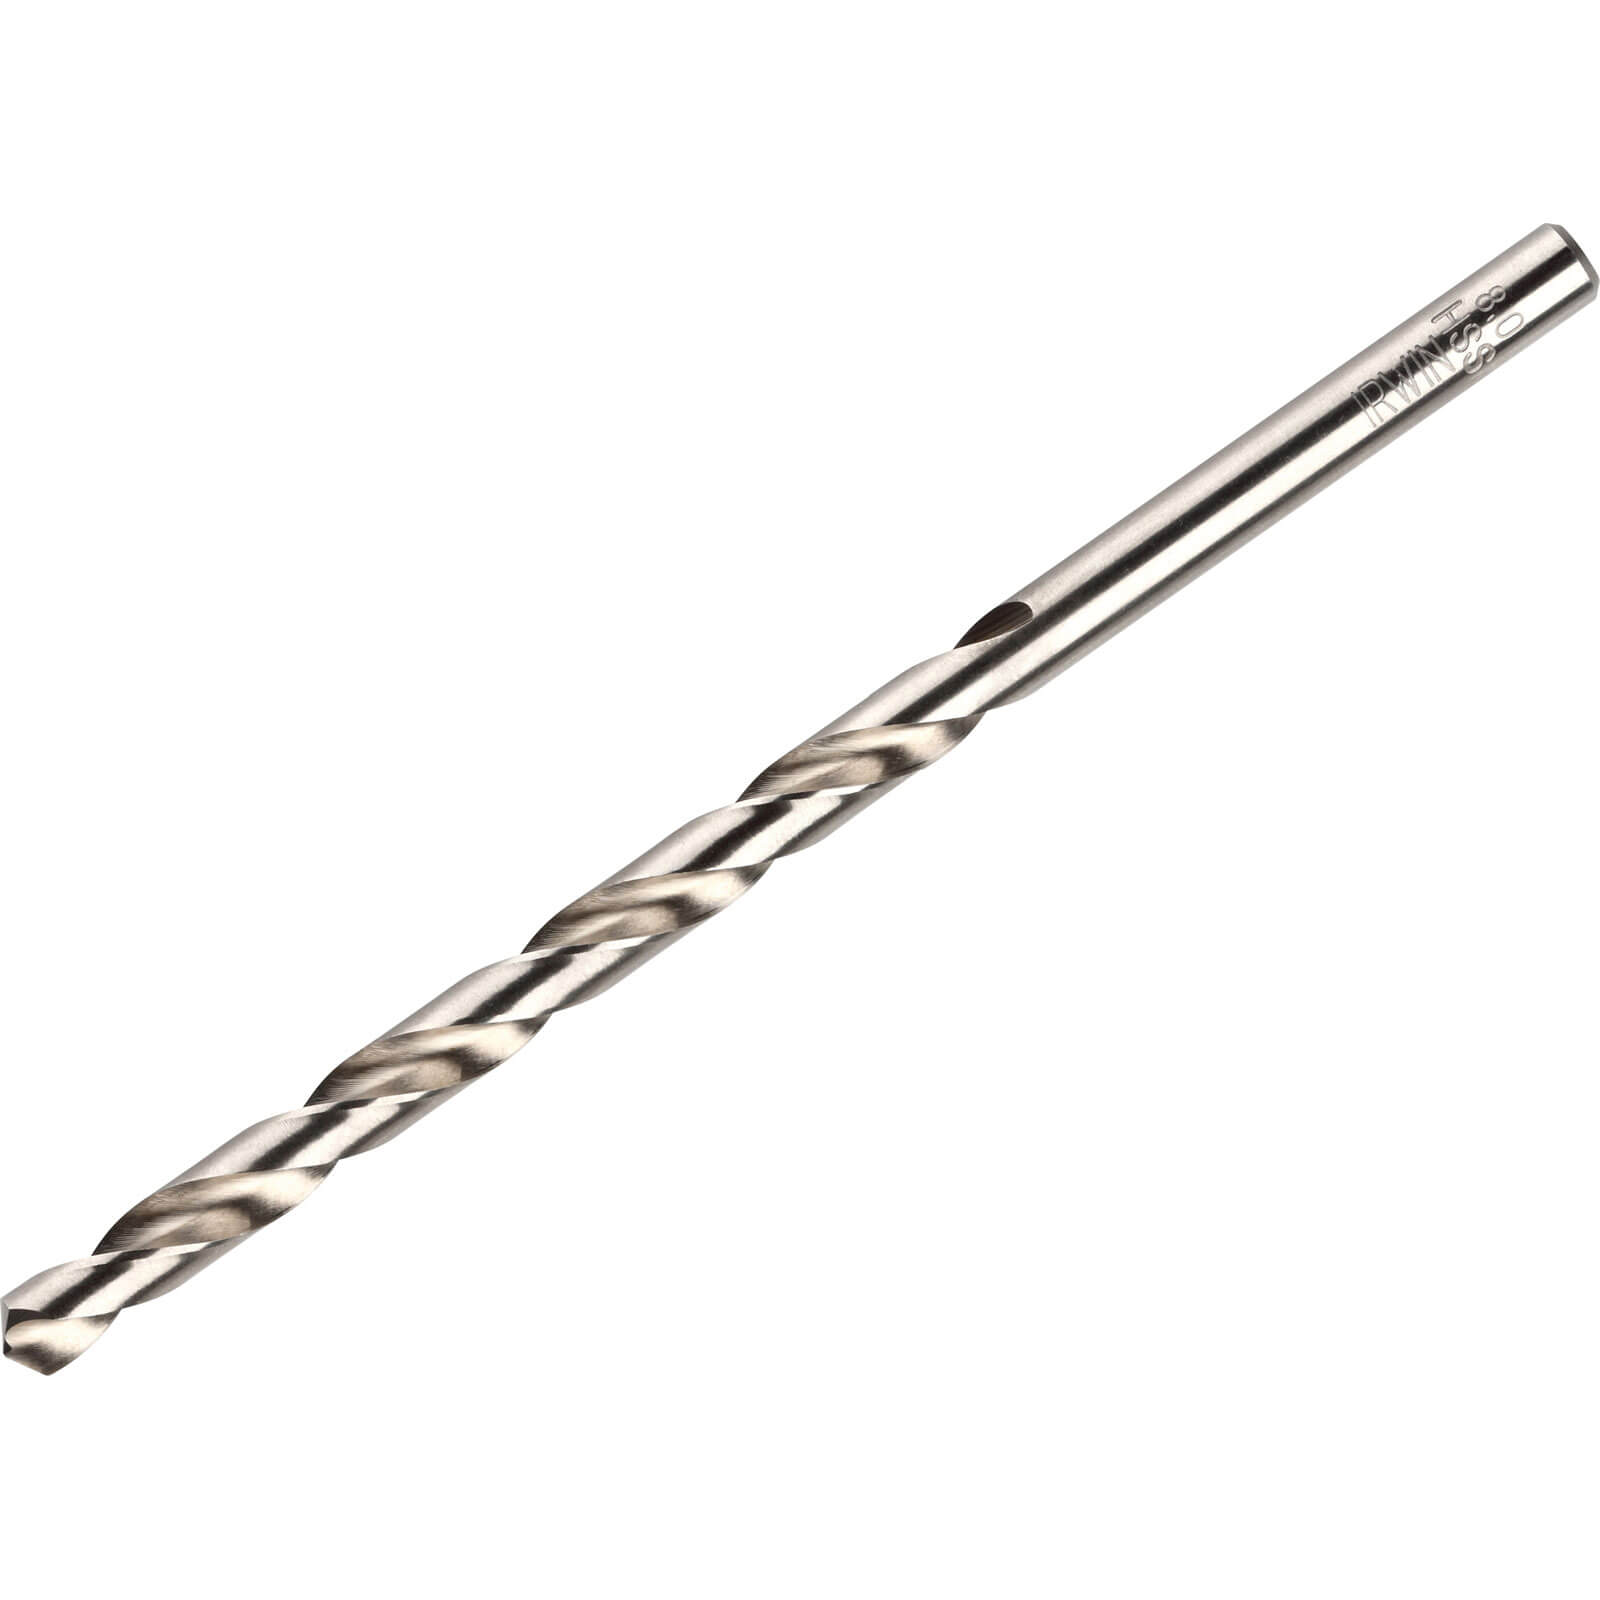 Photo of Irwin Hss Pro Drill Bits 7.5mm Pack Of 5